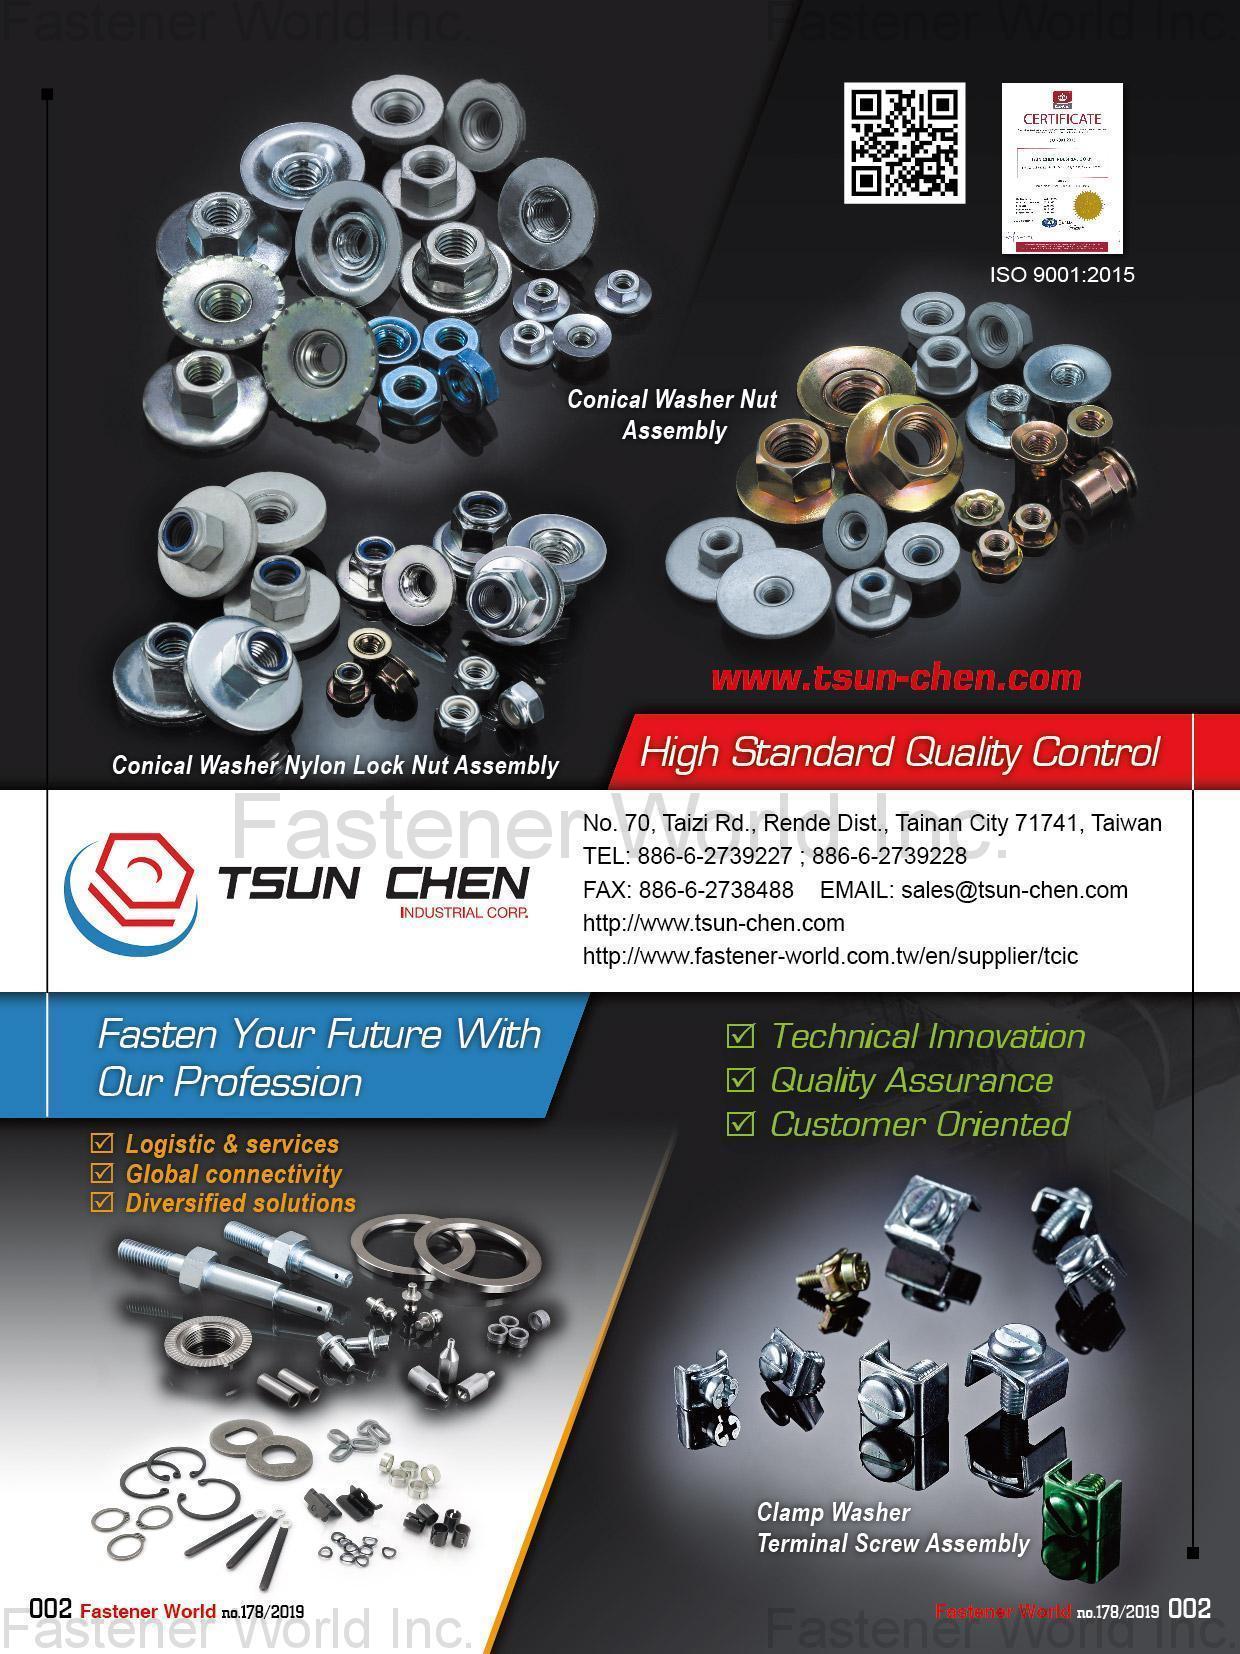 TSUN CHEN INDUSTRIAL CORP.   -  Professional Assembly Manufacturer , TSUN CHEN INDUSTRIAL CORP._Special Washers_Conical Washer Nuts_Flange Nylon Nuts With Washers_Hex Nuts With Conical Washers_SEMS Screws